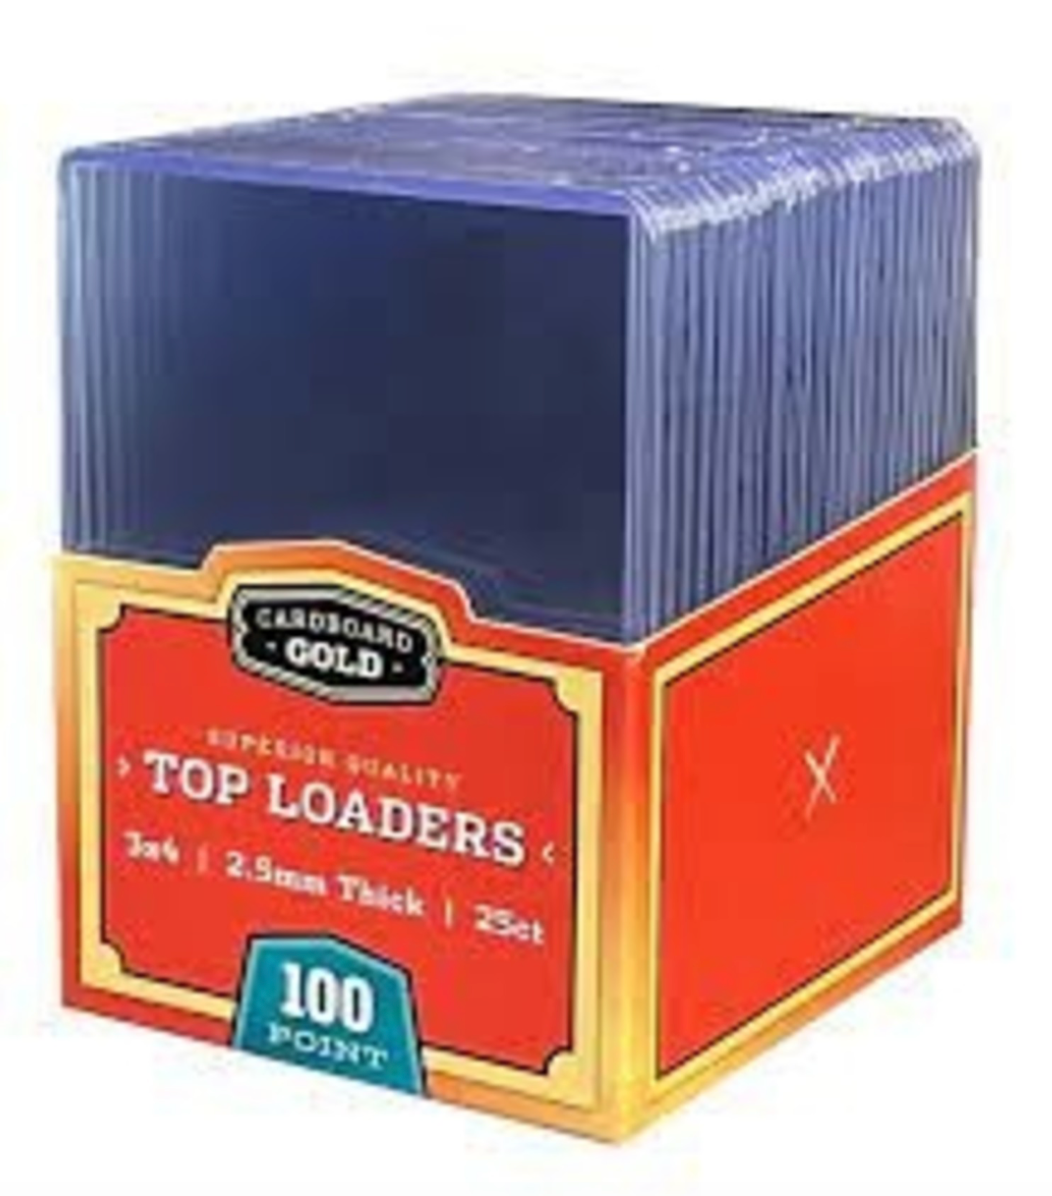 Cardboard Gold Top Loaders 100 Point